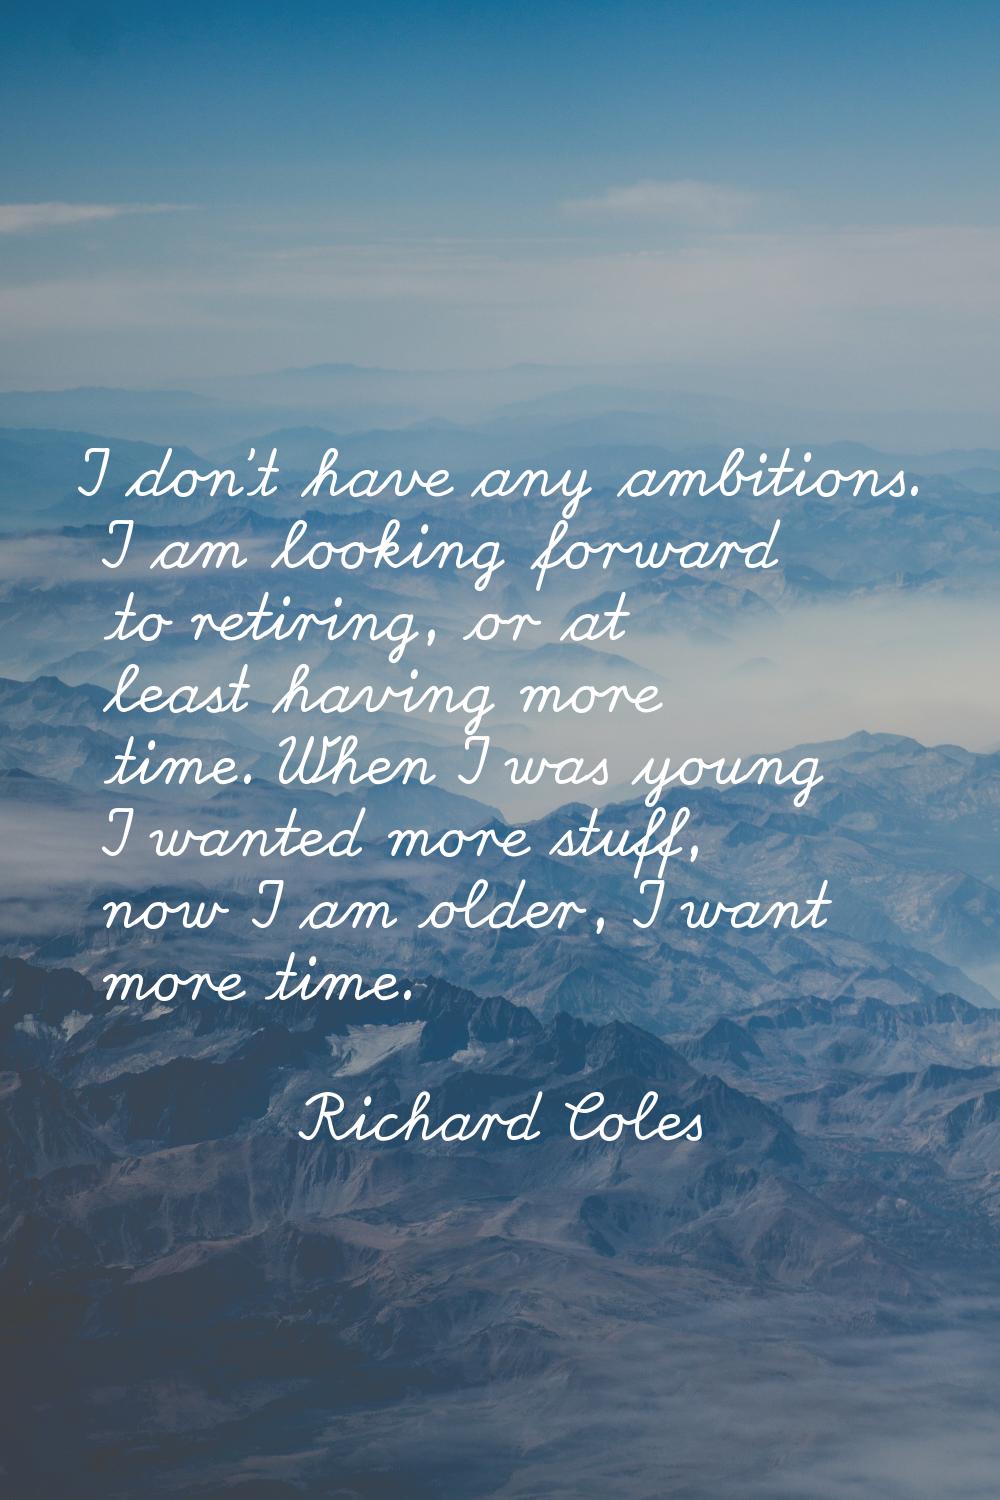 I don't have any ambitions. I am looking forward to retiring, or at least having more time. When I 